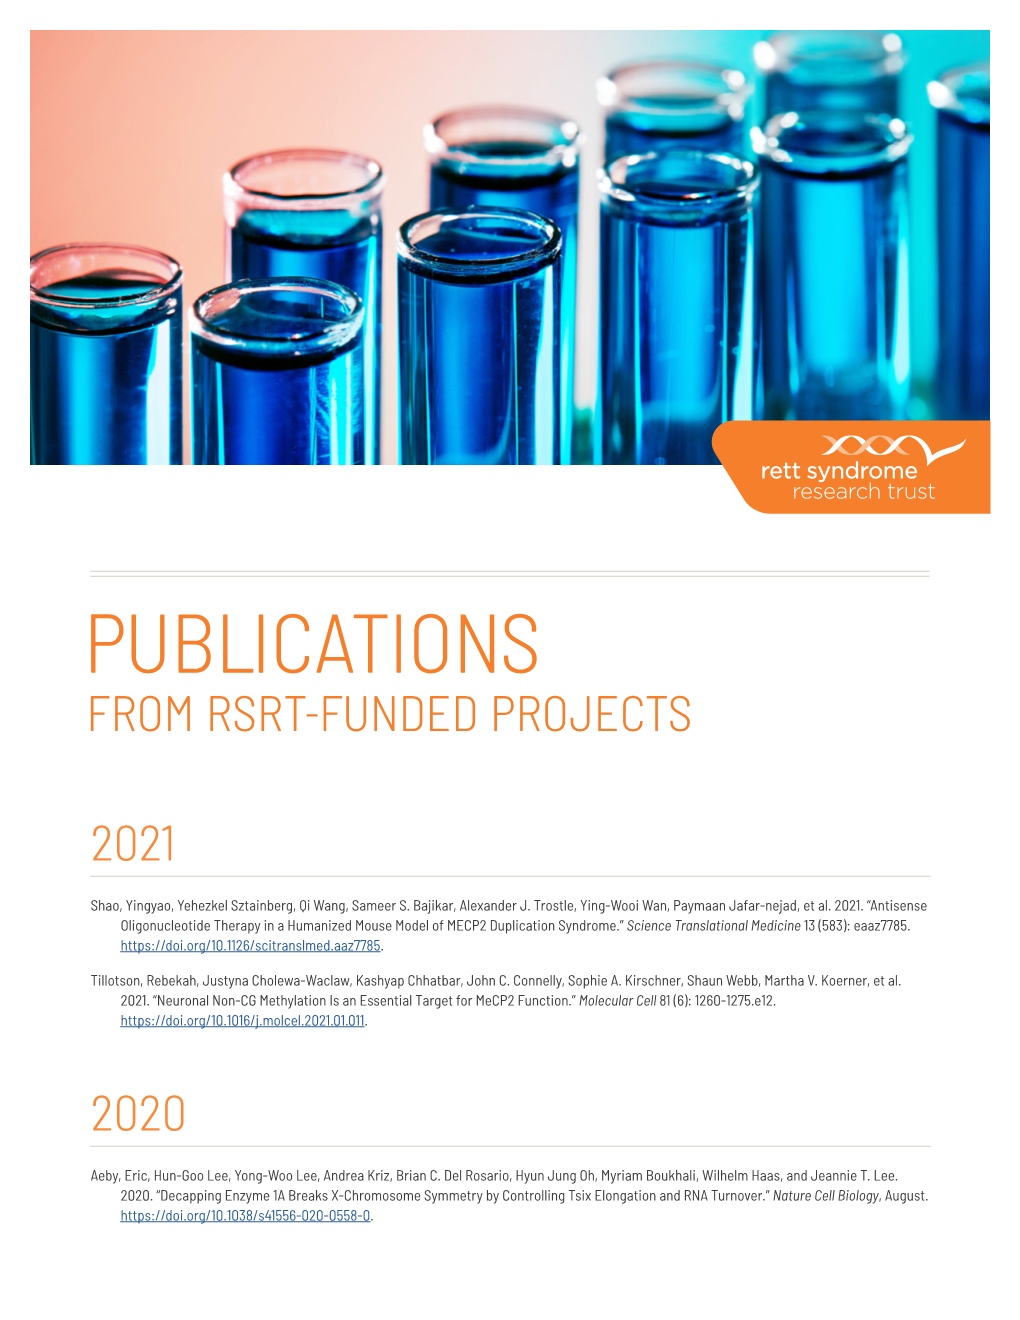 Publications from Rsrt-Funded Projects